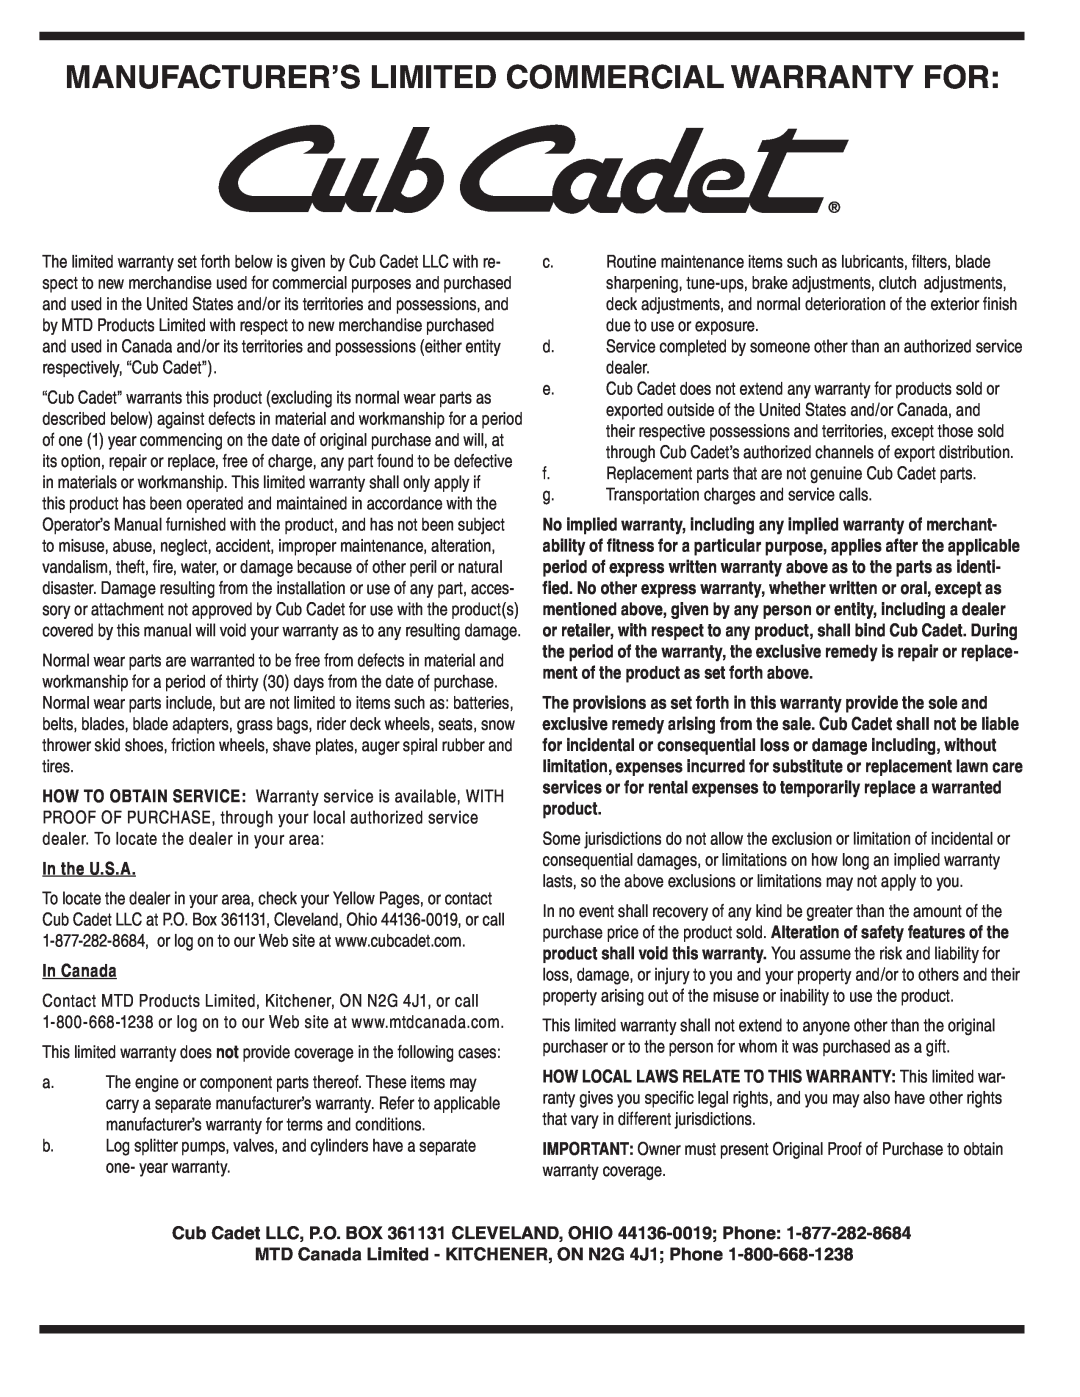 Cub Cadet 933 SWE, 930 SWE warranty Manufacturer’S Limited Commercial Warranty For, In the U.S.A, In Canada 